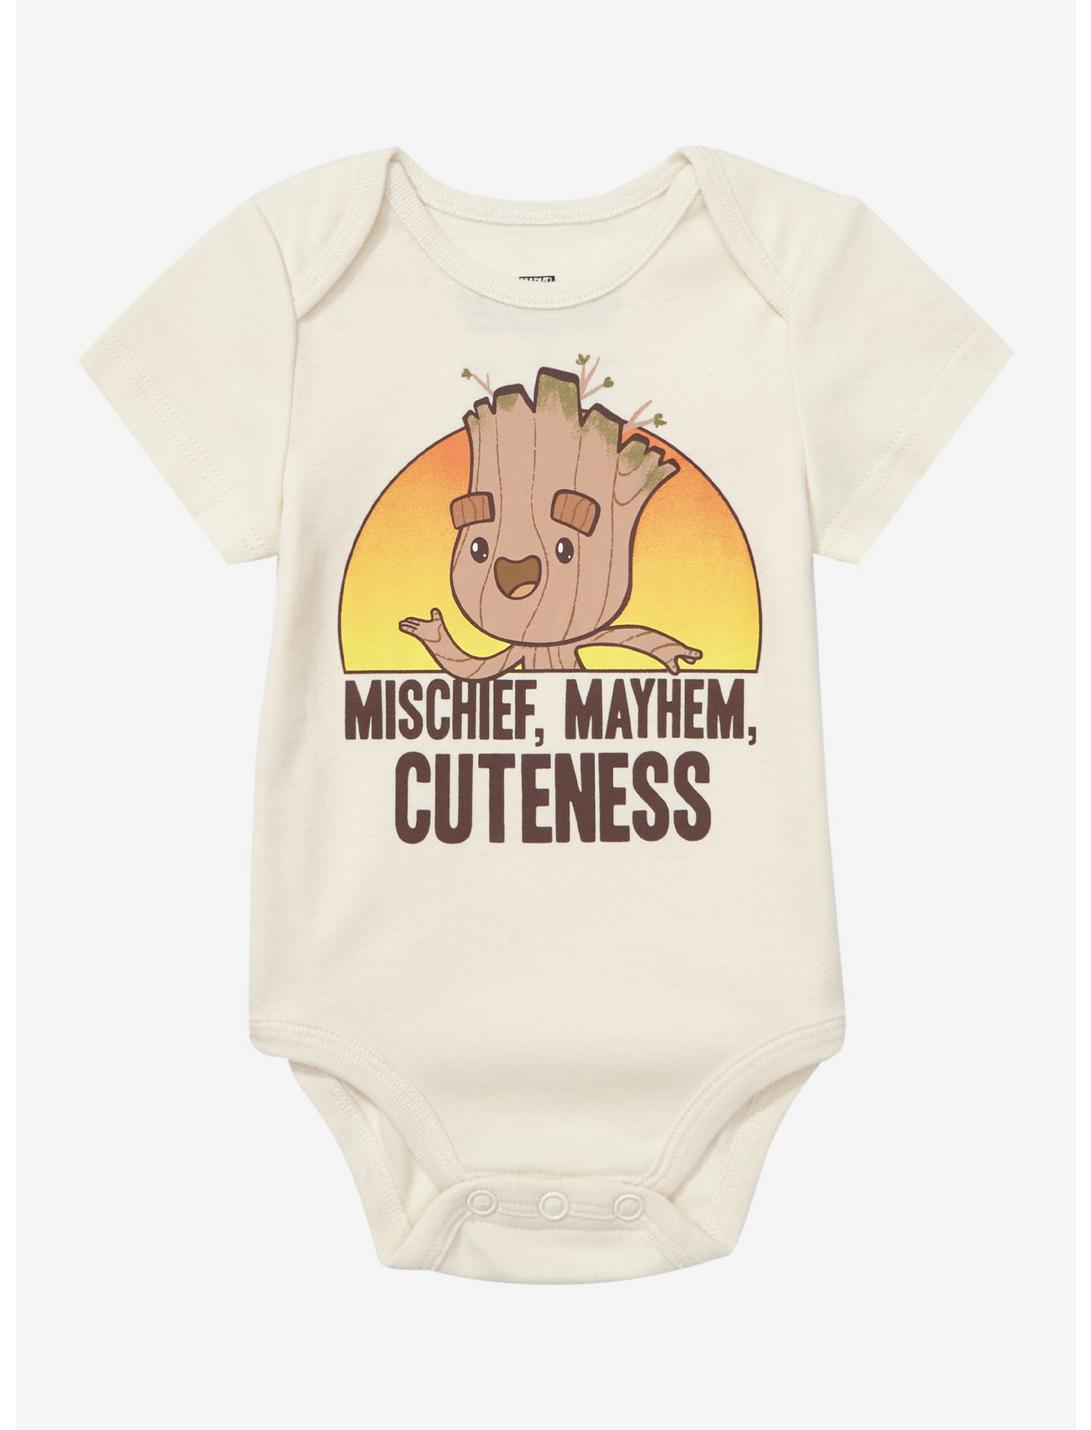 Marvel Guardians of the Galaxy Groot Portrait Infant One-Piece, GREY, hi-res